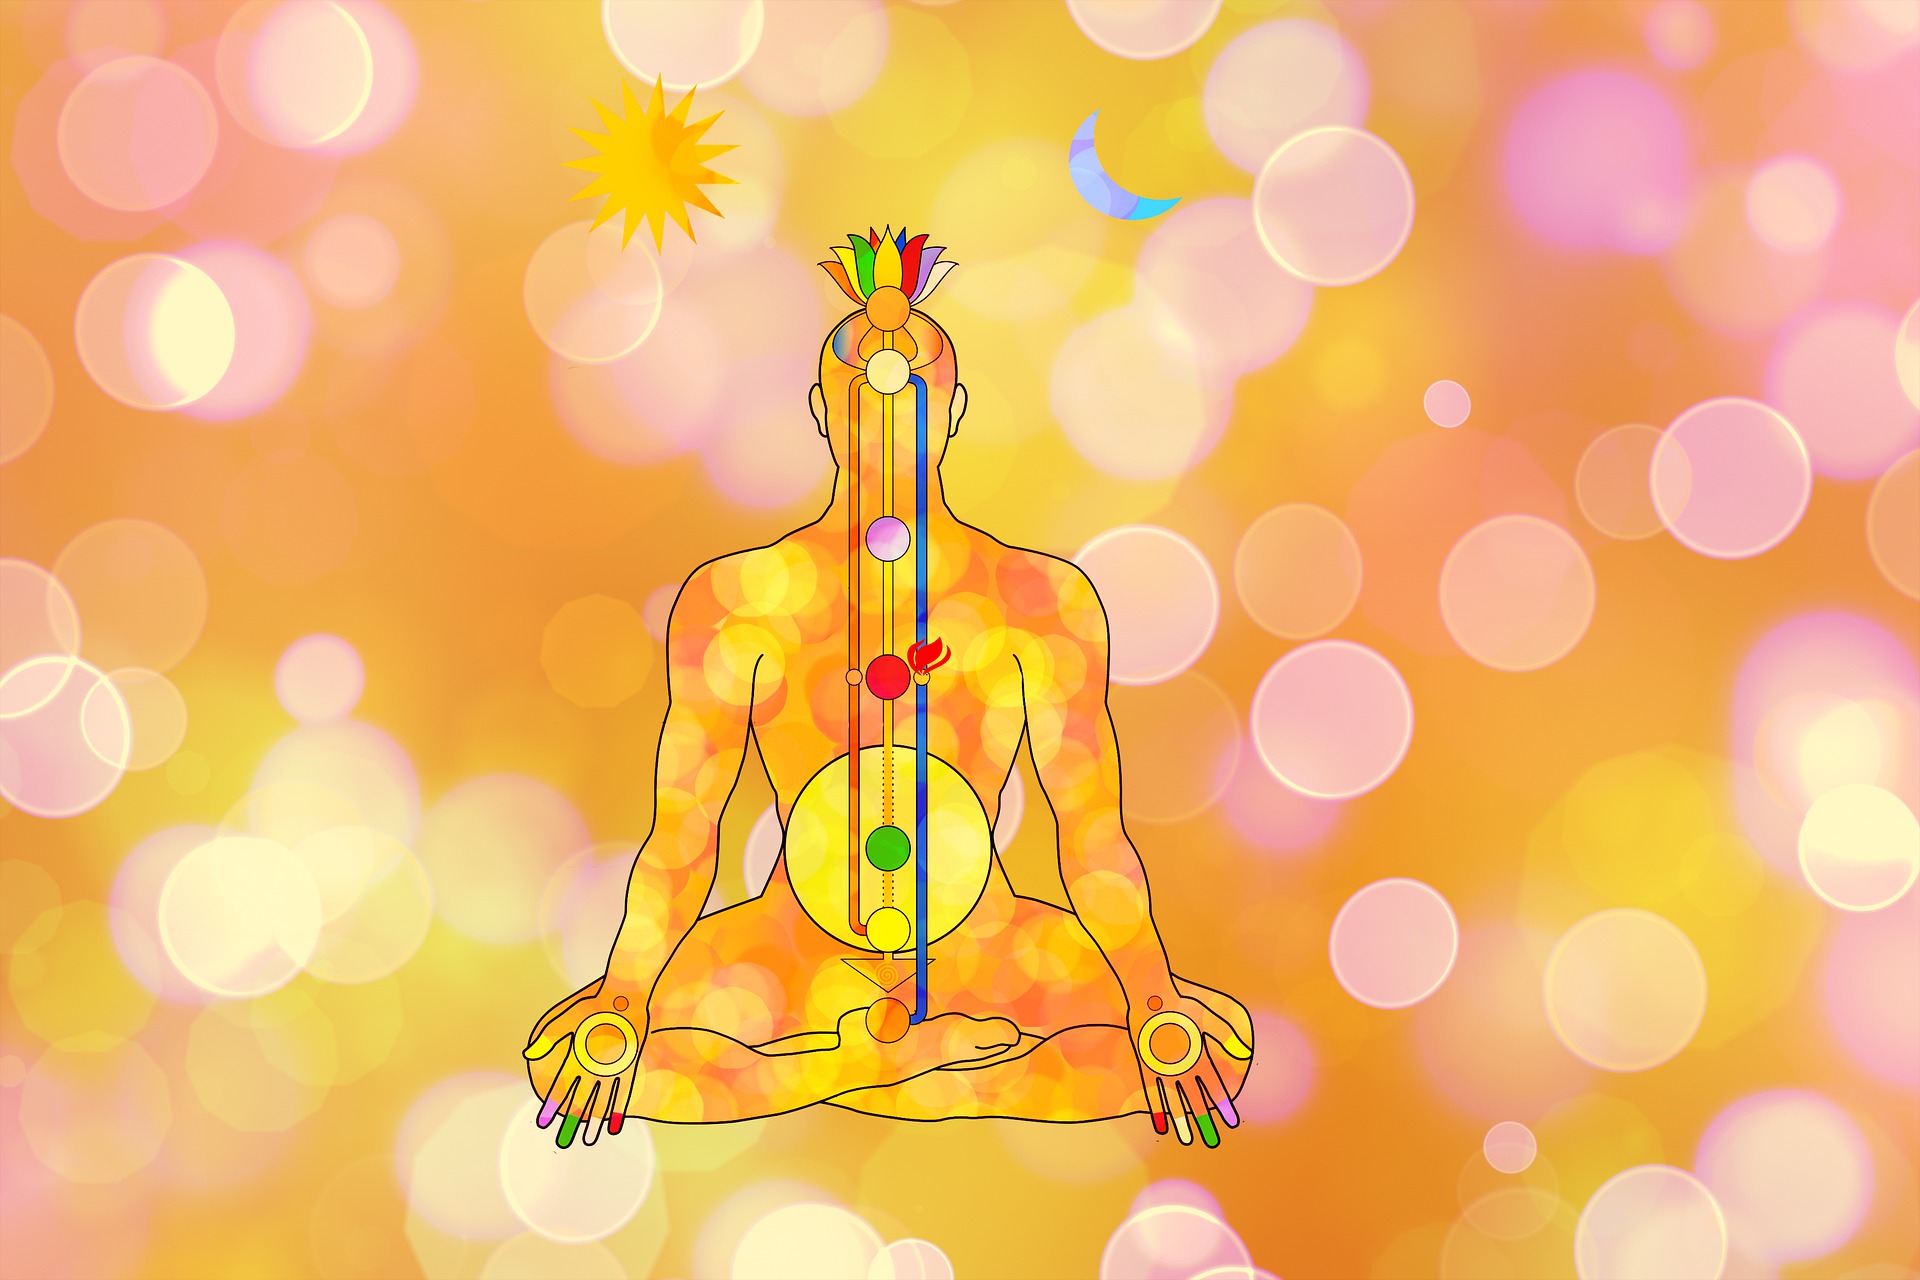 An illustration of a person with open chakras.